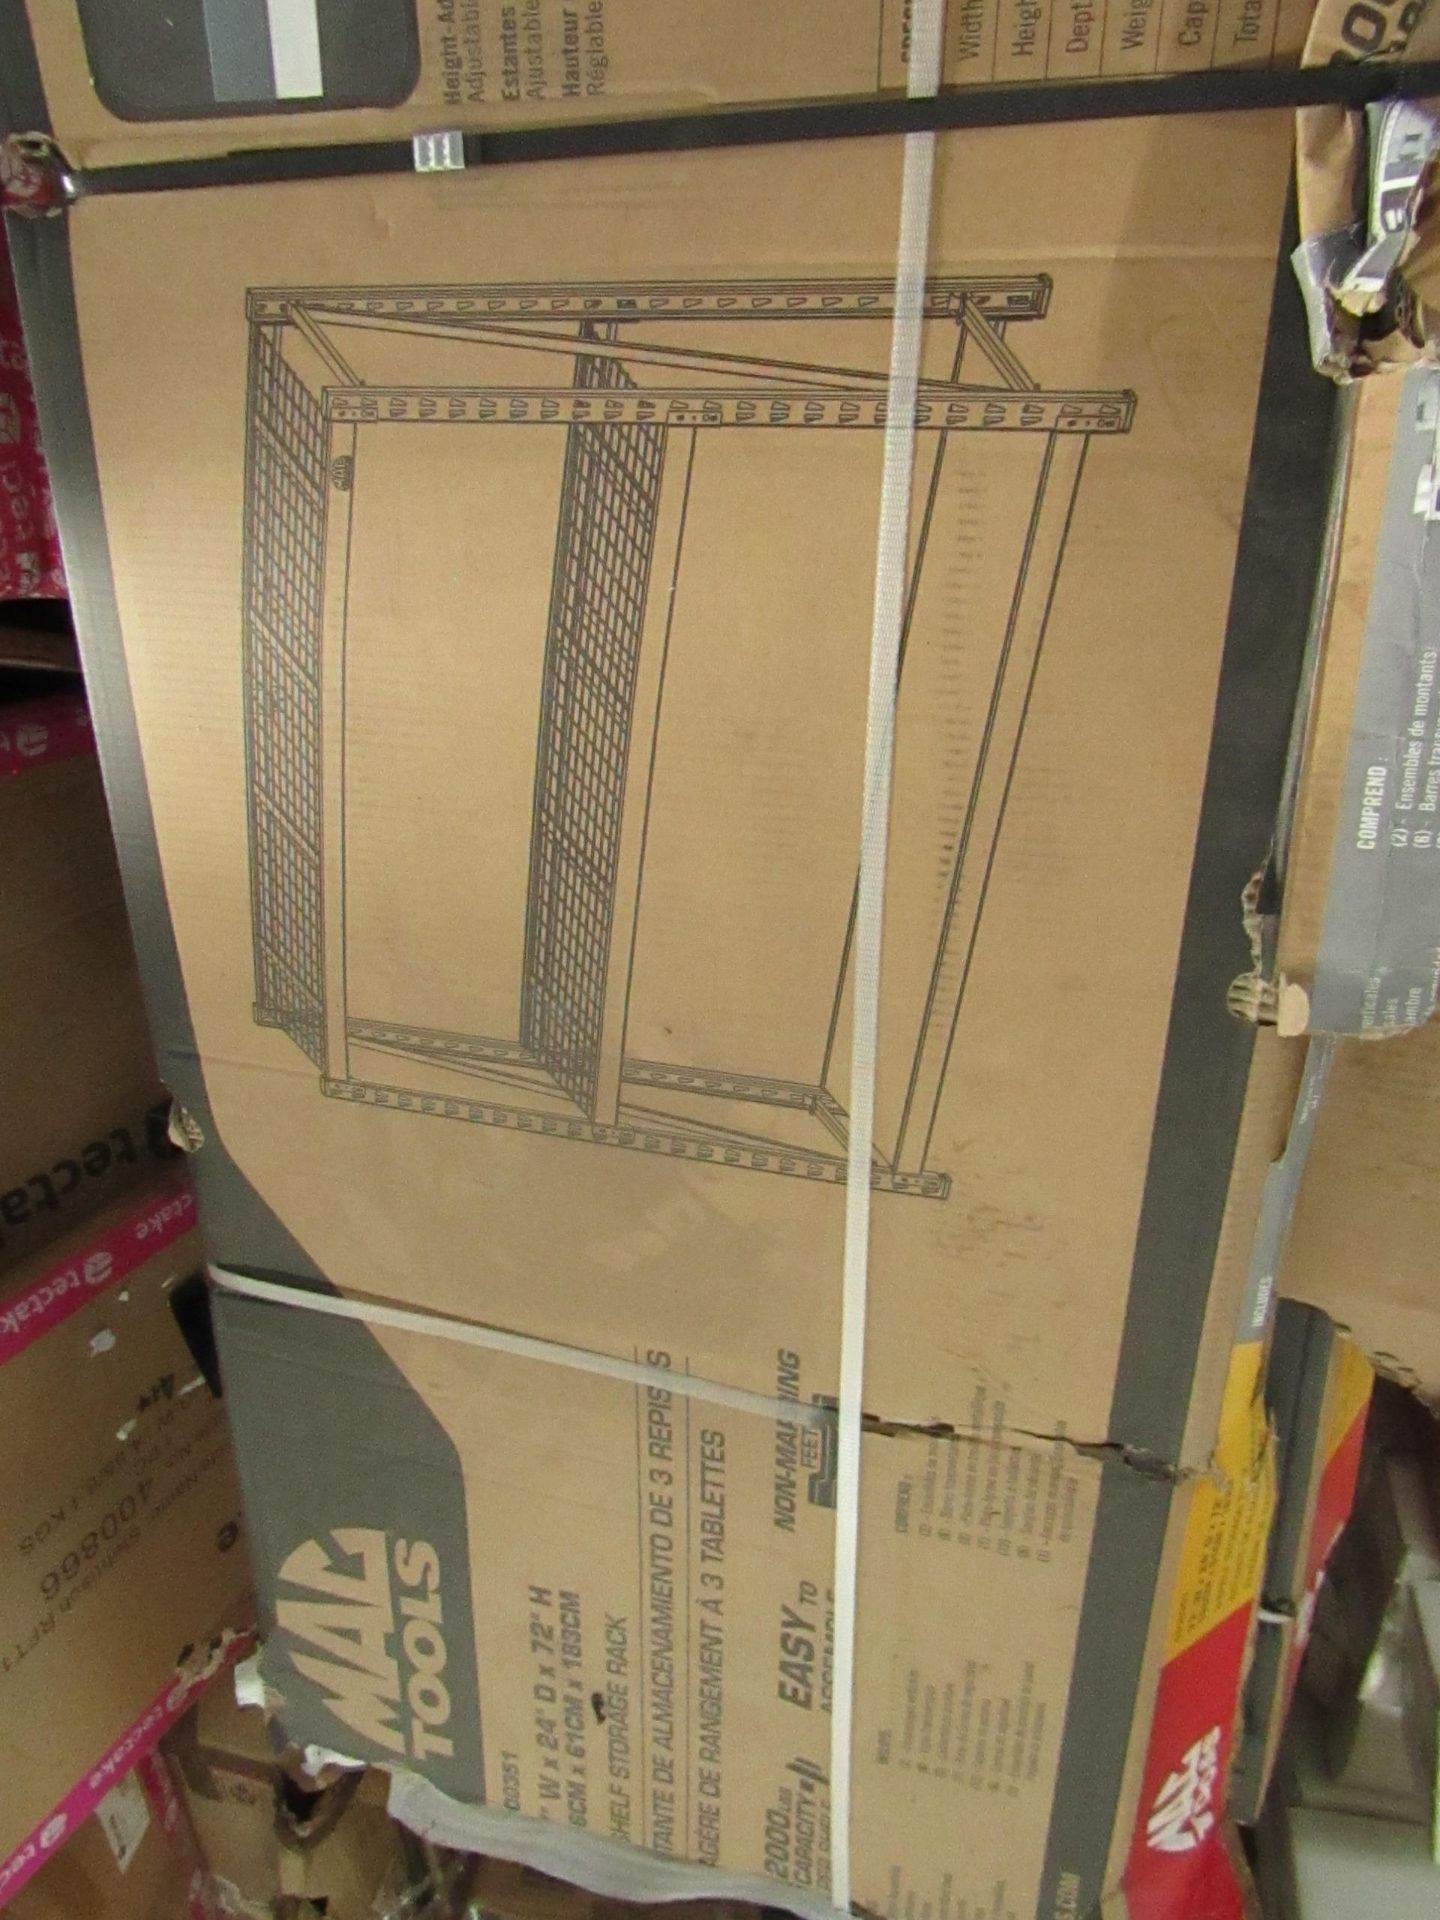 Mac Tools - Shelf Storage Rack ( H184 x W195.3 x D61 CM ) - Box May Be Damaged, Unchecked & Boxed.